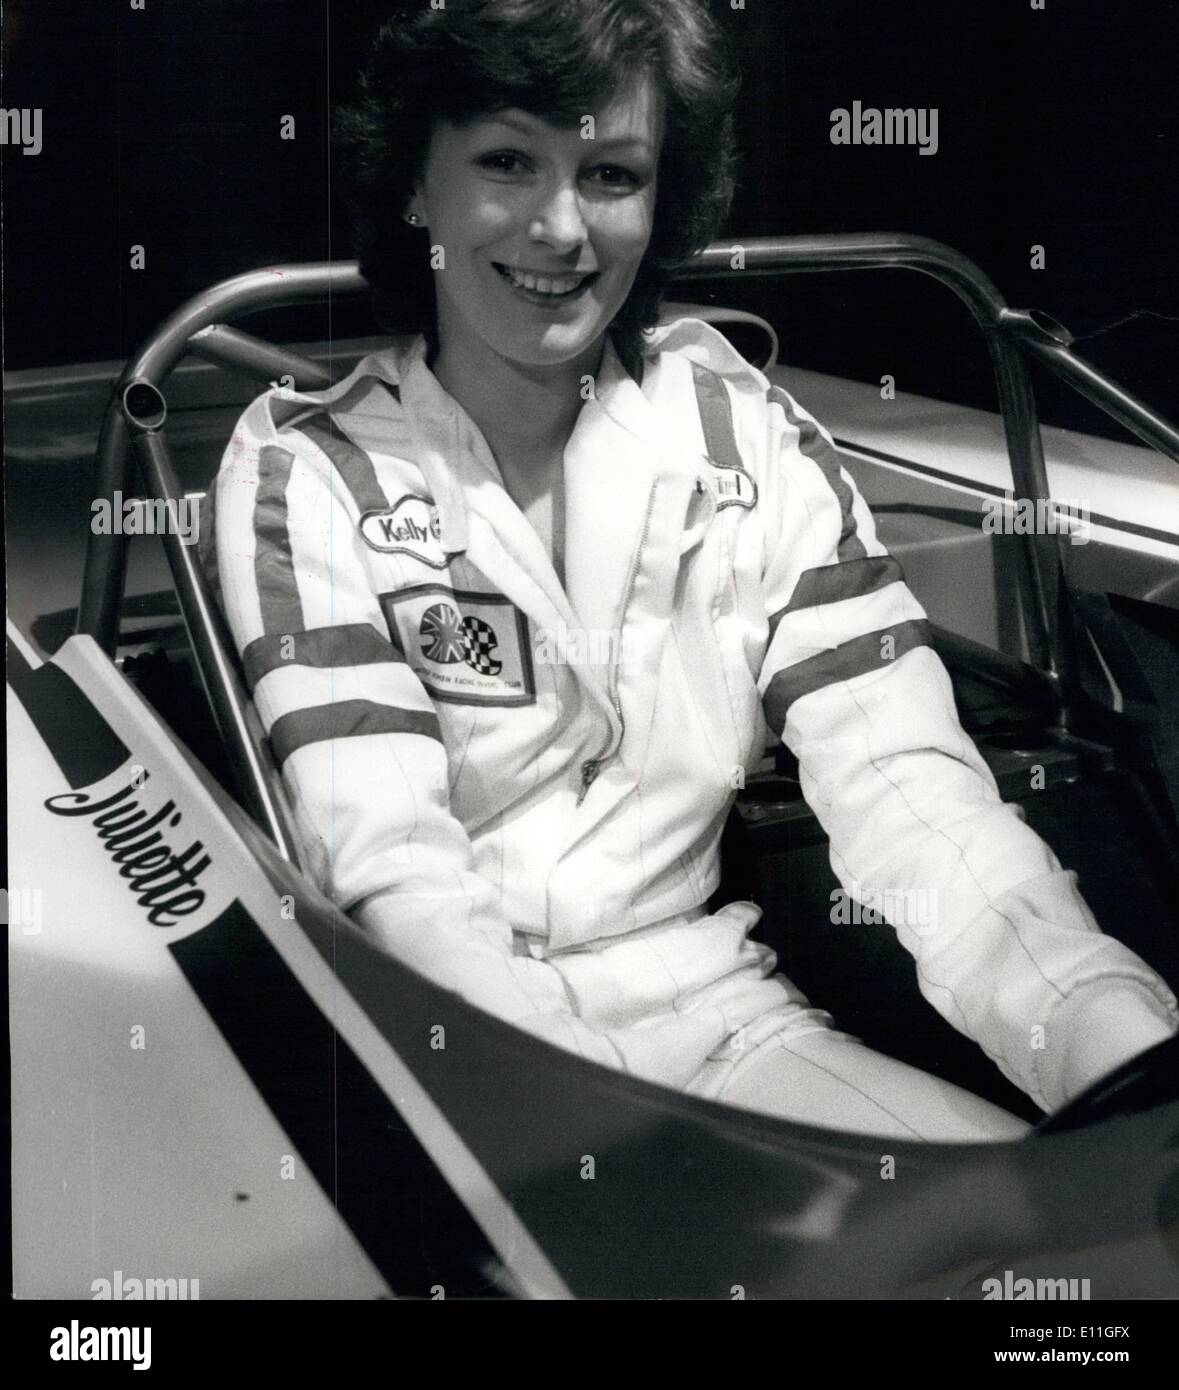 Feb. 02, 1978 - JULLETTE SLAUGHTER TO FOLLOW DIVIRA JULIETTE SLAIGHFER , A TOP BRITISH LADY RACING DRIVER, IS TO REPLACE DIVINA Stock Photo